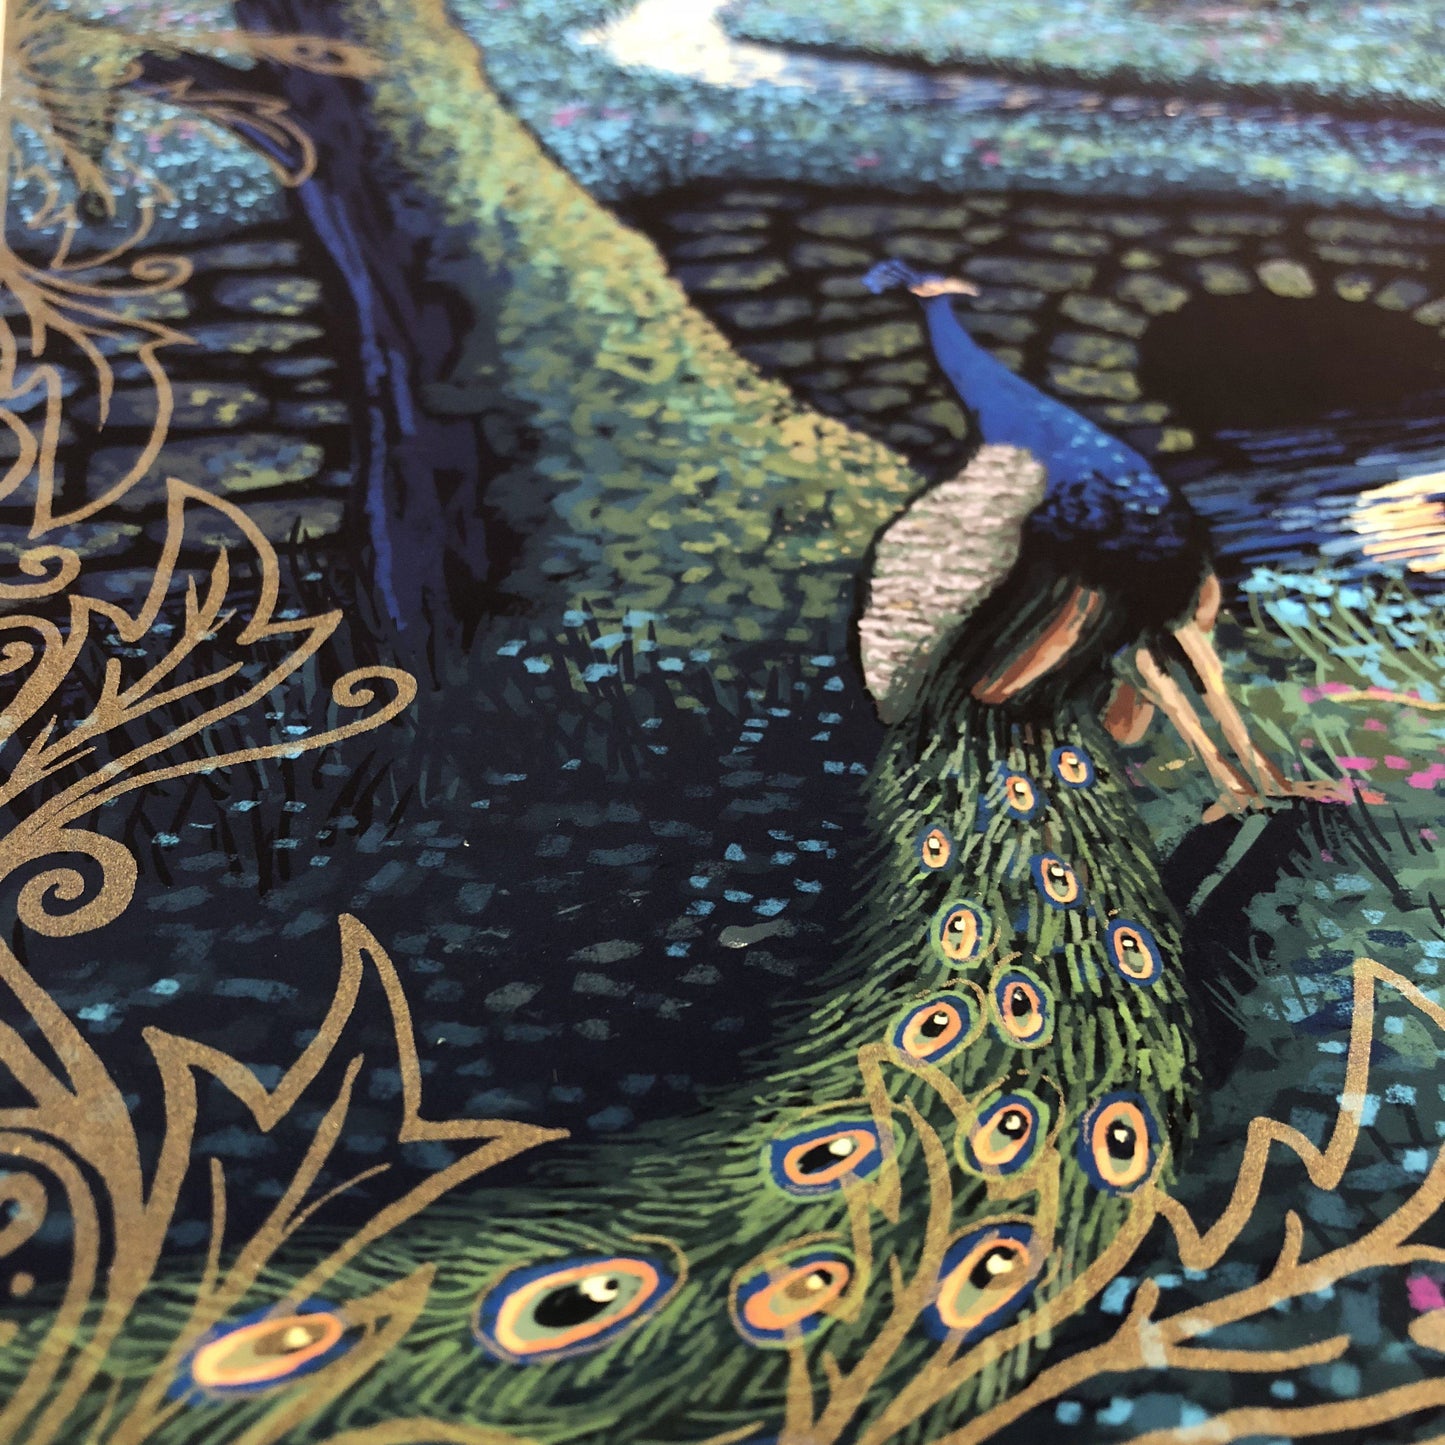 Back in the Garden (Limited Edition of 93) Print James R. Eads